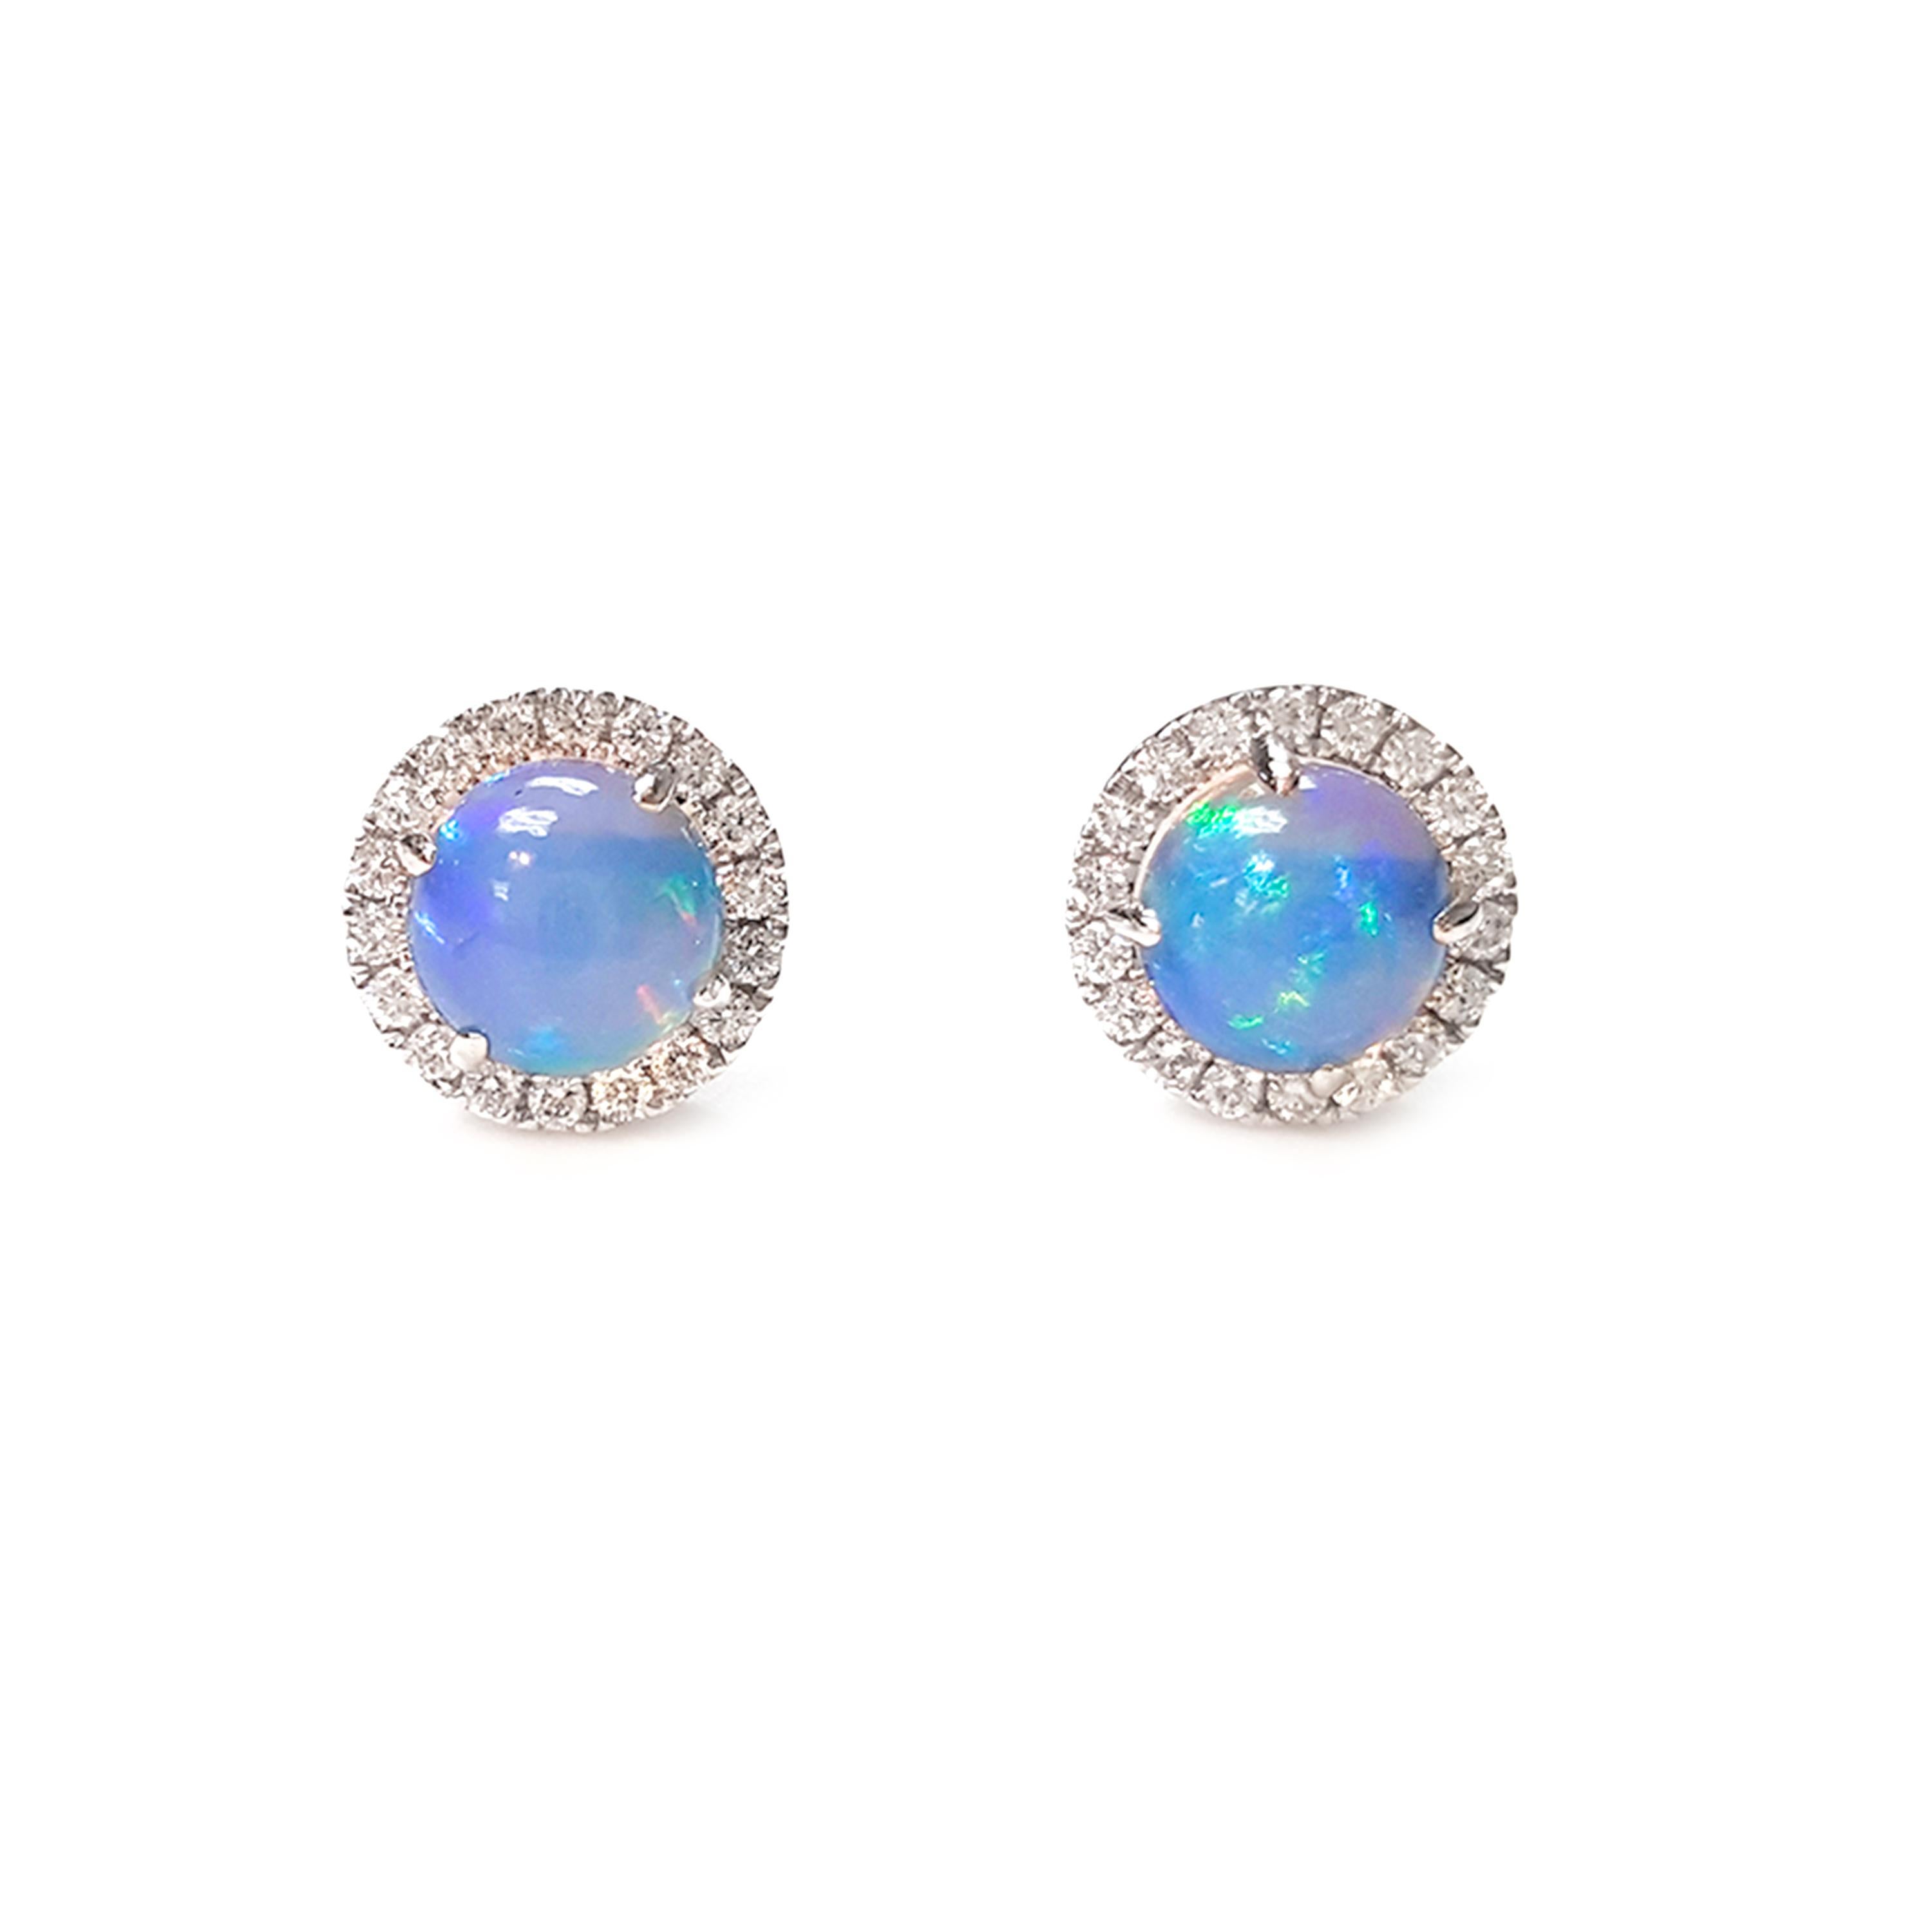 This Ladies 14k White Gold Opal and Diamonds Stud Earring has 2.03 carats of Opal and 0.39 carats of Diamonds. 